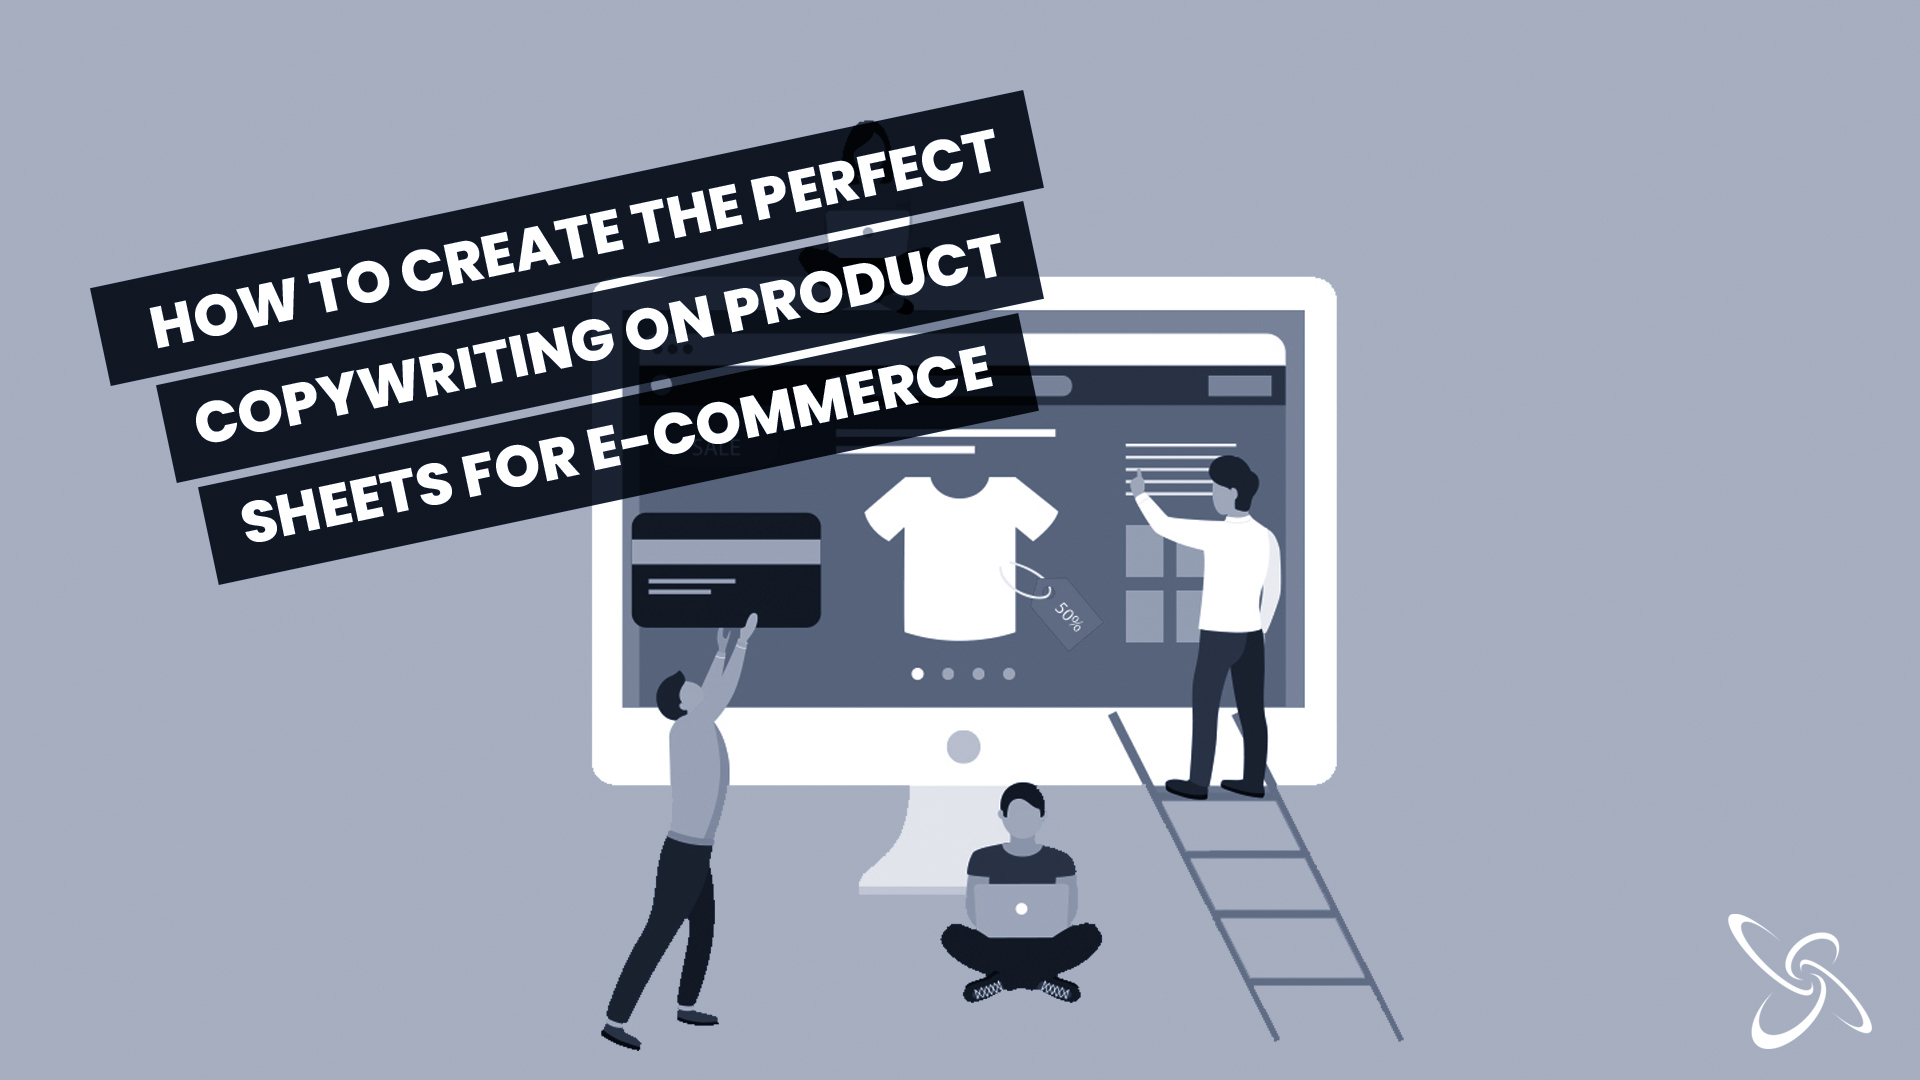 how to create the perfect copywriting on product sheets for e-commerce